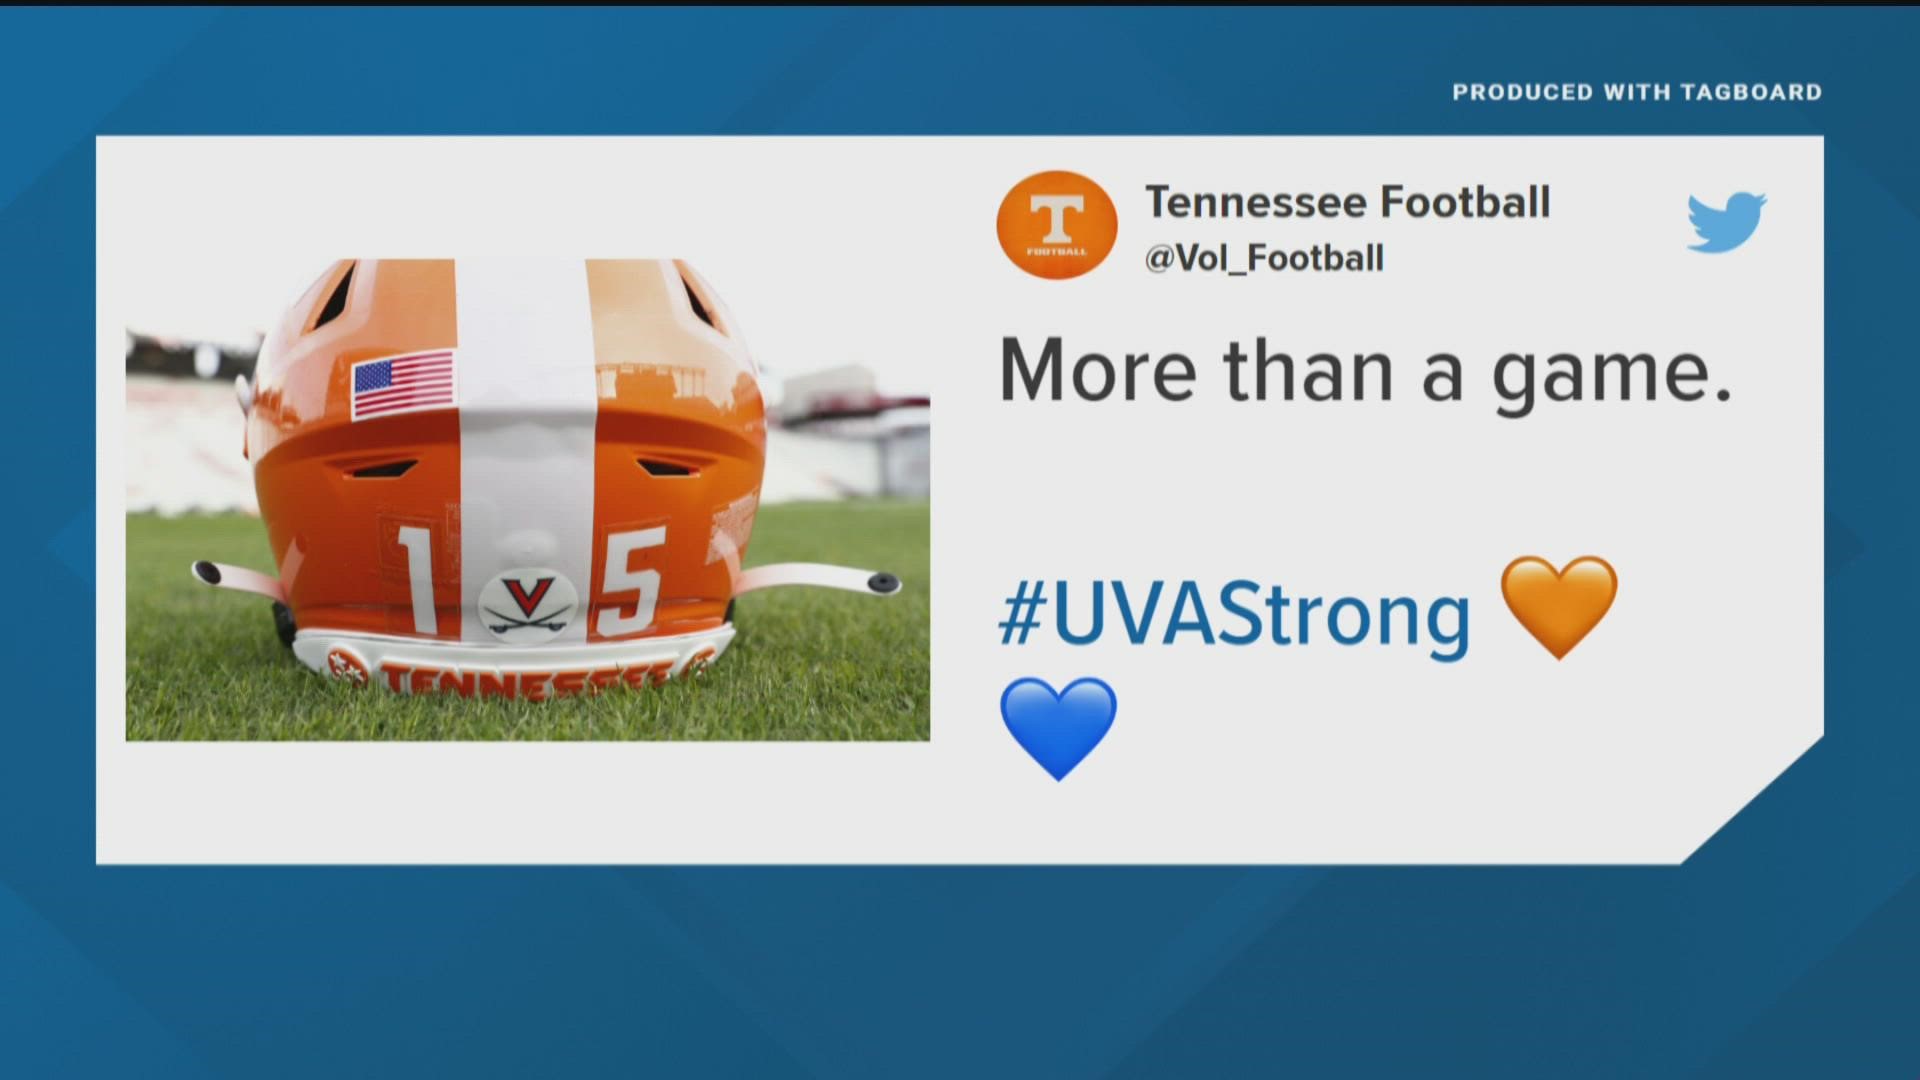 The Vols are showing support for the Univesity of Virginia in Saturday's game against South Carolina.